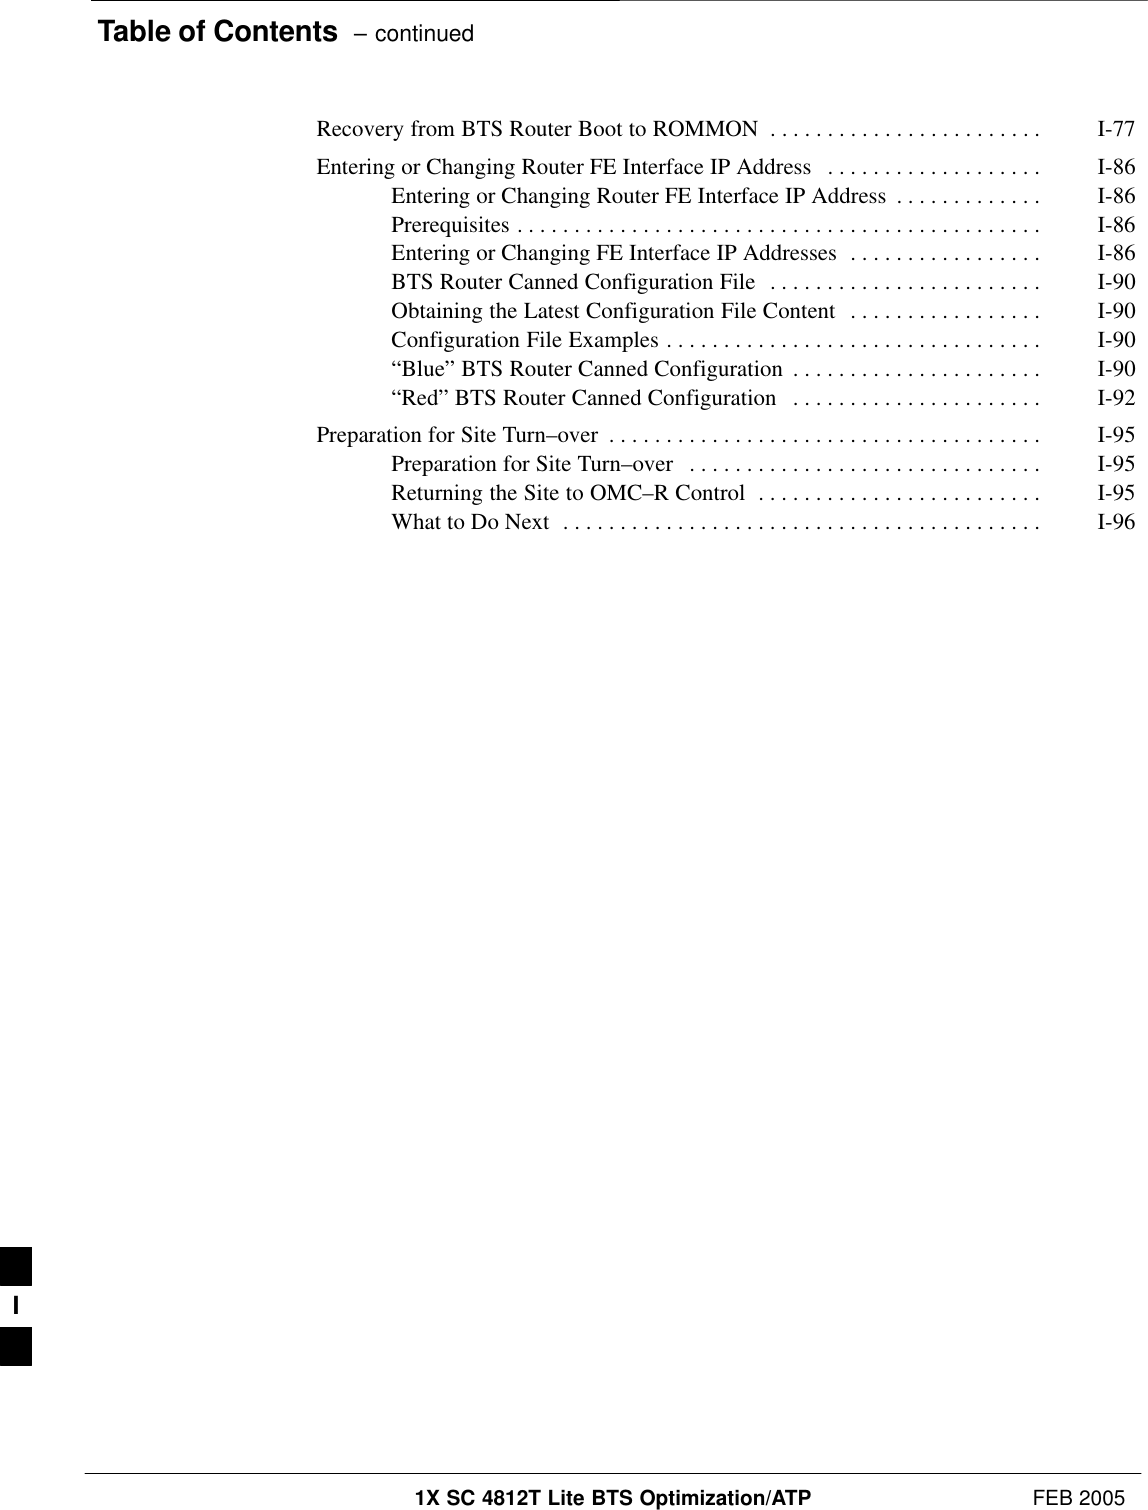 Table of Contents  – continued1X SC 4812T Lite BTS Optimization/ATP FEB 2005PRELIMINARYRecovery from BTS Router Boot to ROMMON I-77 . . . . . . . . . . . . . . . . . . . . . . . . Entering or Changing Router FE Interface IP Address I-86 . . . . . . . . . . . . . . . . . . . Entering or Changing Router FE Interface IP Address I-86 . . . . . . . . . . . . . Prerequisites I-86 . . . . . . . . . . . . . . . . . . . . . . . . . . . . . . . . . . . . . . . . . . . . . . Entering or Changing FE Interface IP Addresses I-86 . . . . . . . . . . . . . . . . . BTS Router Canned Configuration File I-90 . . . . . . . . . . . . . . . . . . . . . . . . Obtaining the Latest Configuration File Content I-90 . . . . . . . . . . . . . . . . . Configuration File Examples I-90 . . . . . . . . . . . . . . . . . . . . . . . . . . . . . . . . . “Blue” BTS Router Canned Configuration I-90 . . . . . . . . . . . . . . . . . . . . . . “Red” BTS Router Canned Configuration I-92 . . . . . . . . . . . . . . . . . . . . . . Preparation for Site Turn–over I-95 . . . . . . . . . . . . . . . . . . . . . . . . . . . . . . . . . . . . . . Preparation for Site Turn–over I-95 . . . . . . . . . . . . . . . . . . . . . . . . . . . . . . . Returning the Site to OMC–R Control I-95 . . . . . . . . . . . . . . . . . . . . . . . . . What to Do Next I-96 . . . . . . . . . . . . . . . . . . . . . . . . . . . . . . . . . . . . . . . . . . I